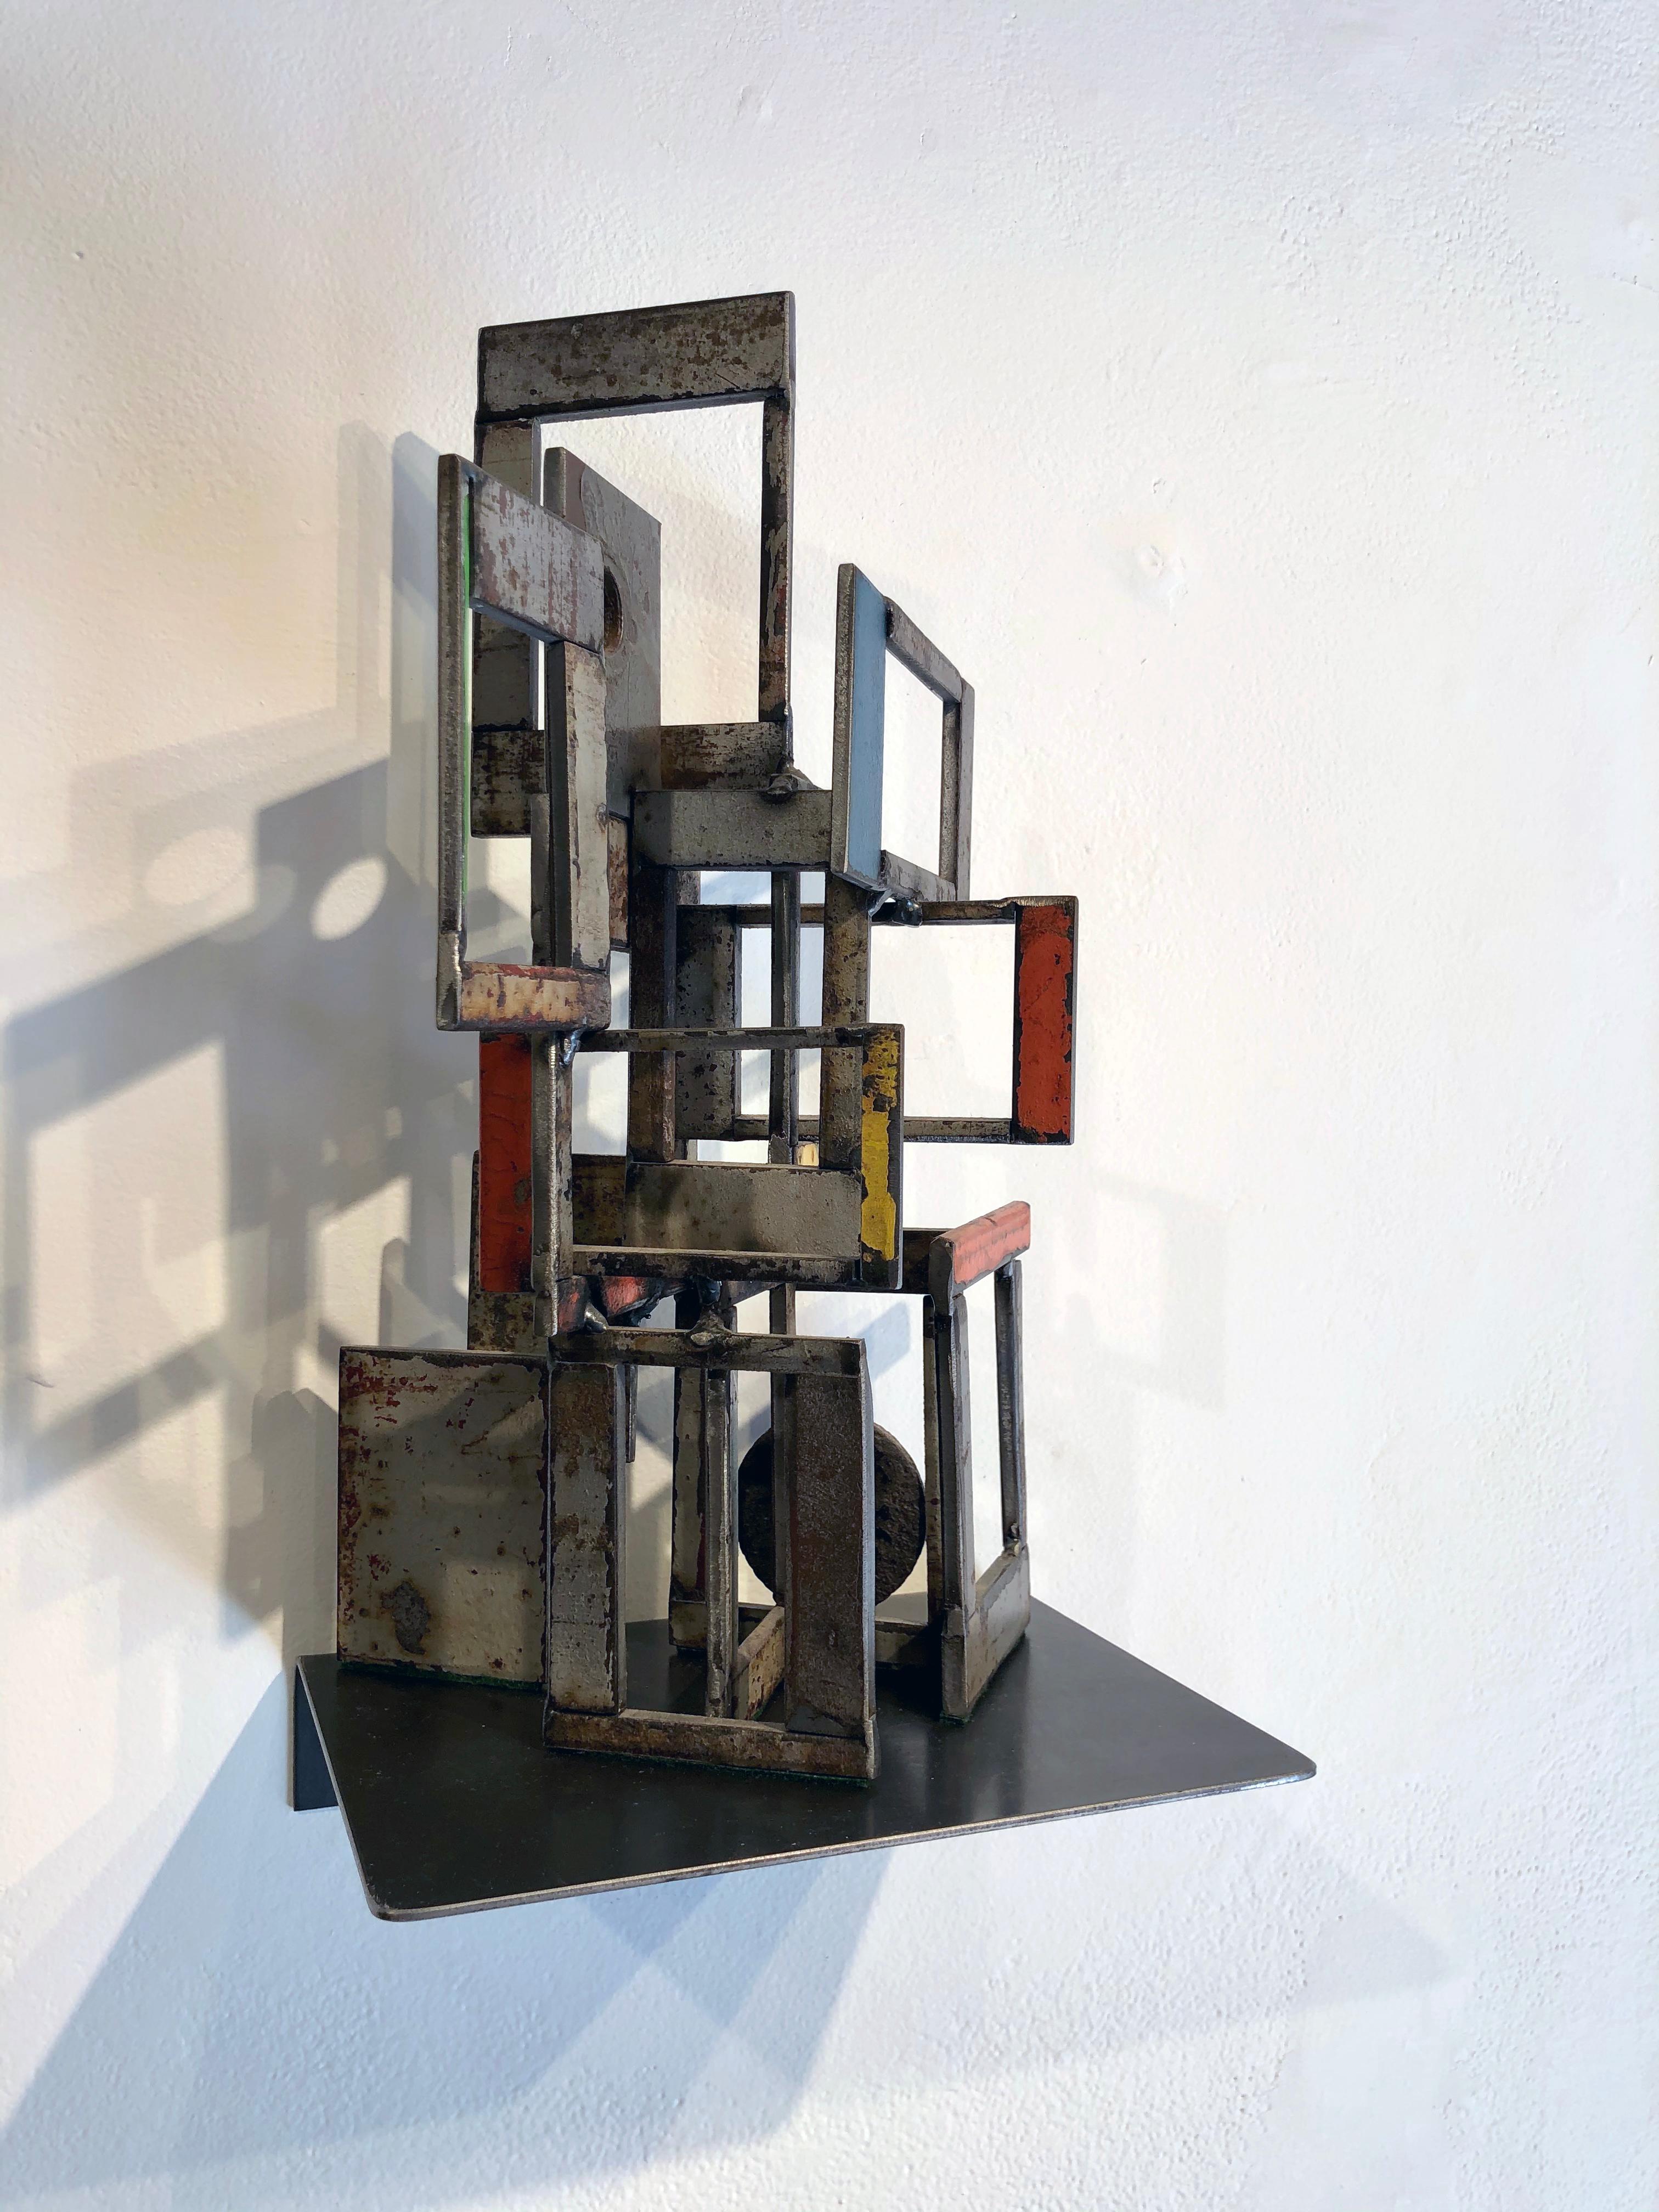 Object 1978, Steel Structure, Welded Sculptural Object Made w/ Salvaged Steel - Contemporary Sculpture by Jim Rose